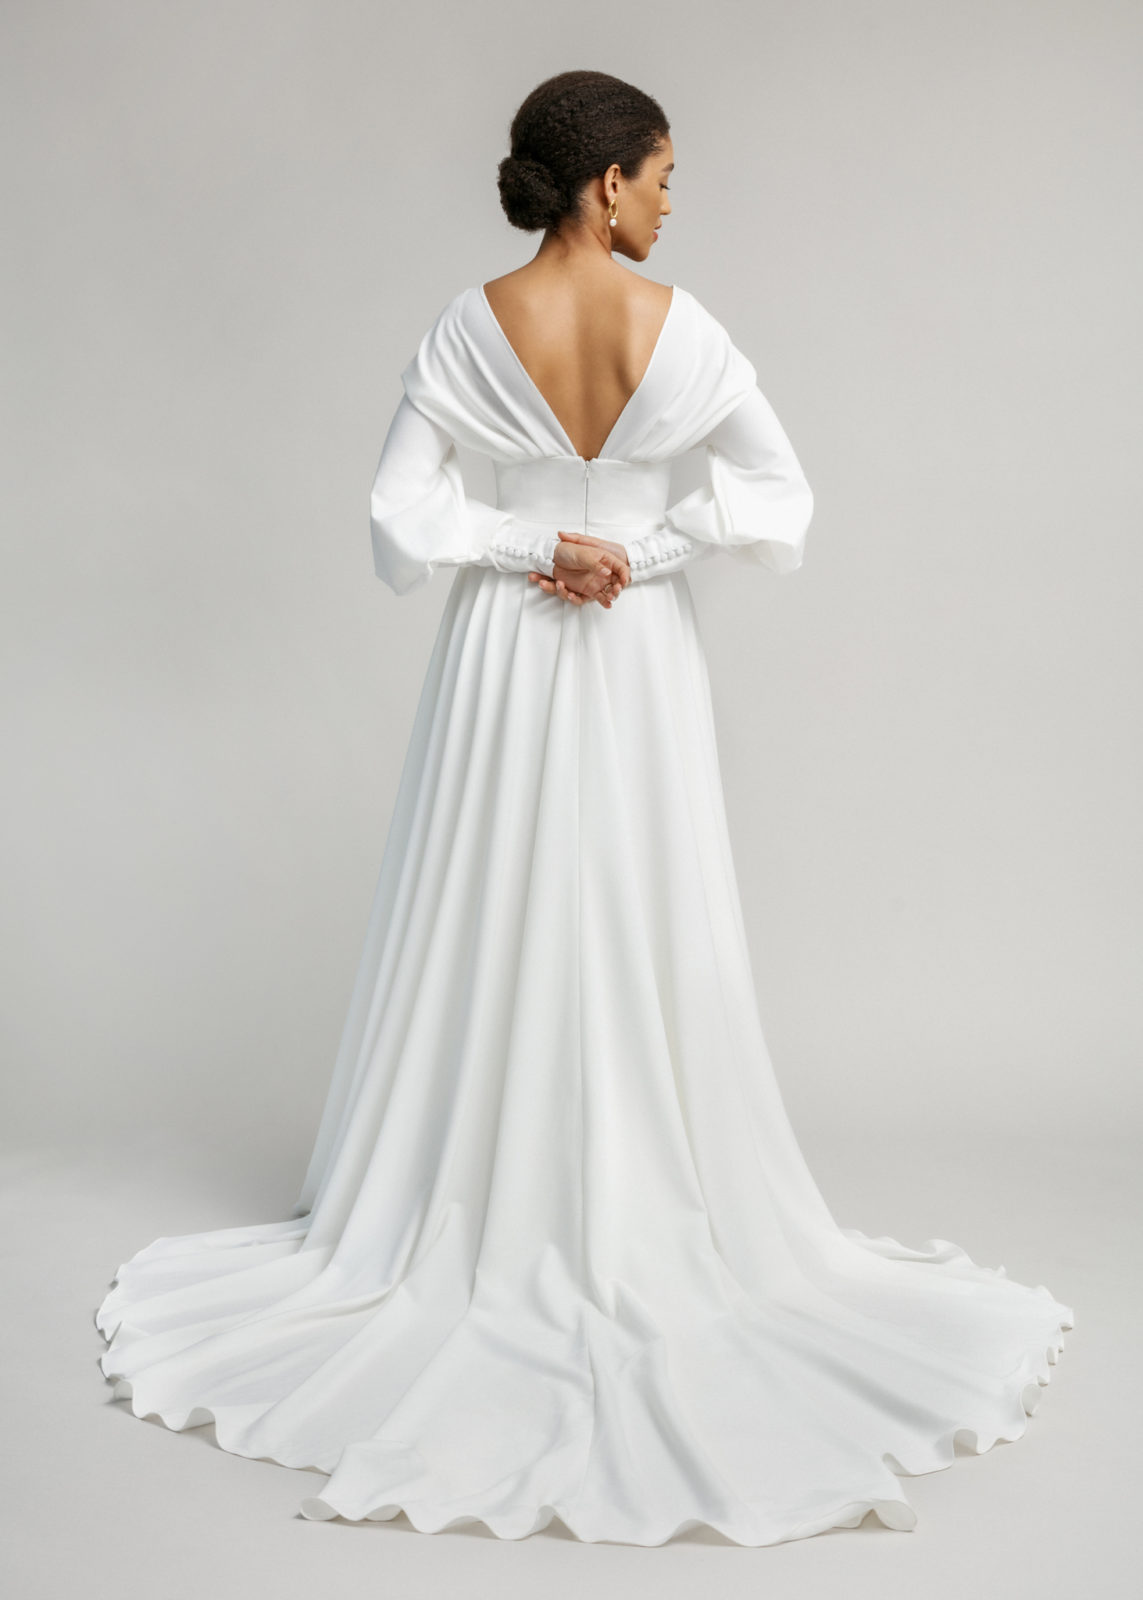 Modest and modern bridal style by Canadian designer Aesling